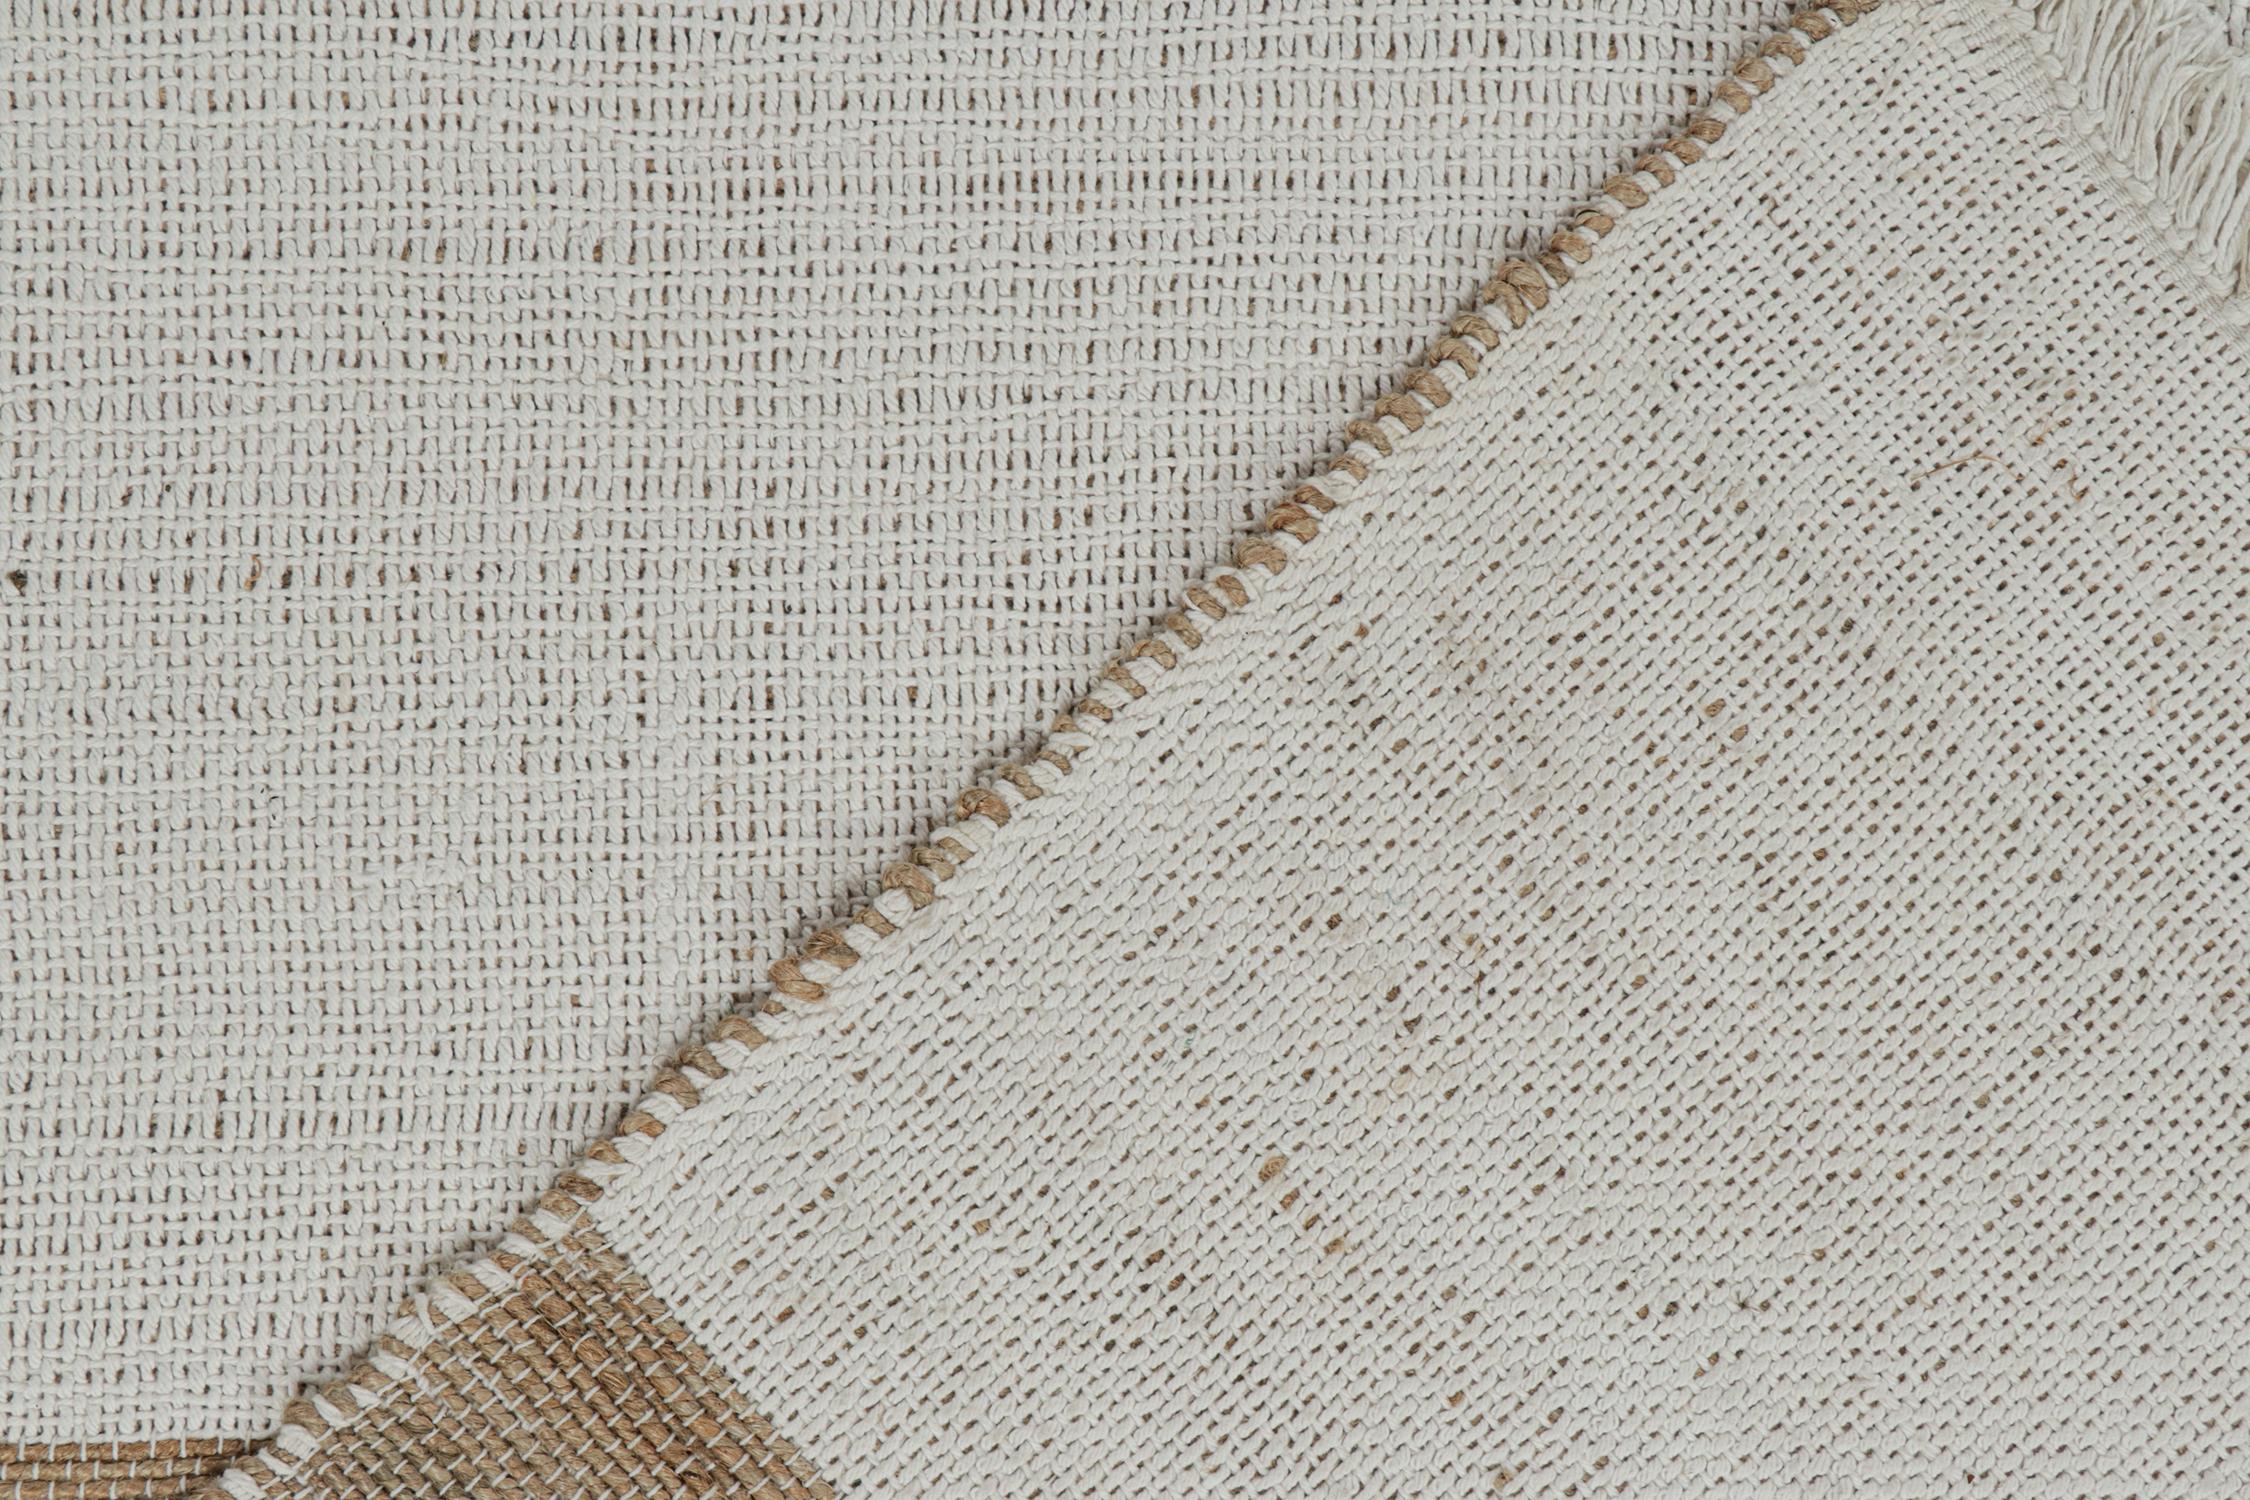 Rug & Kilim’s Contemporary Jute Flat Weave in White and Beige-Brown Stripes For Sale 1